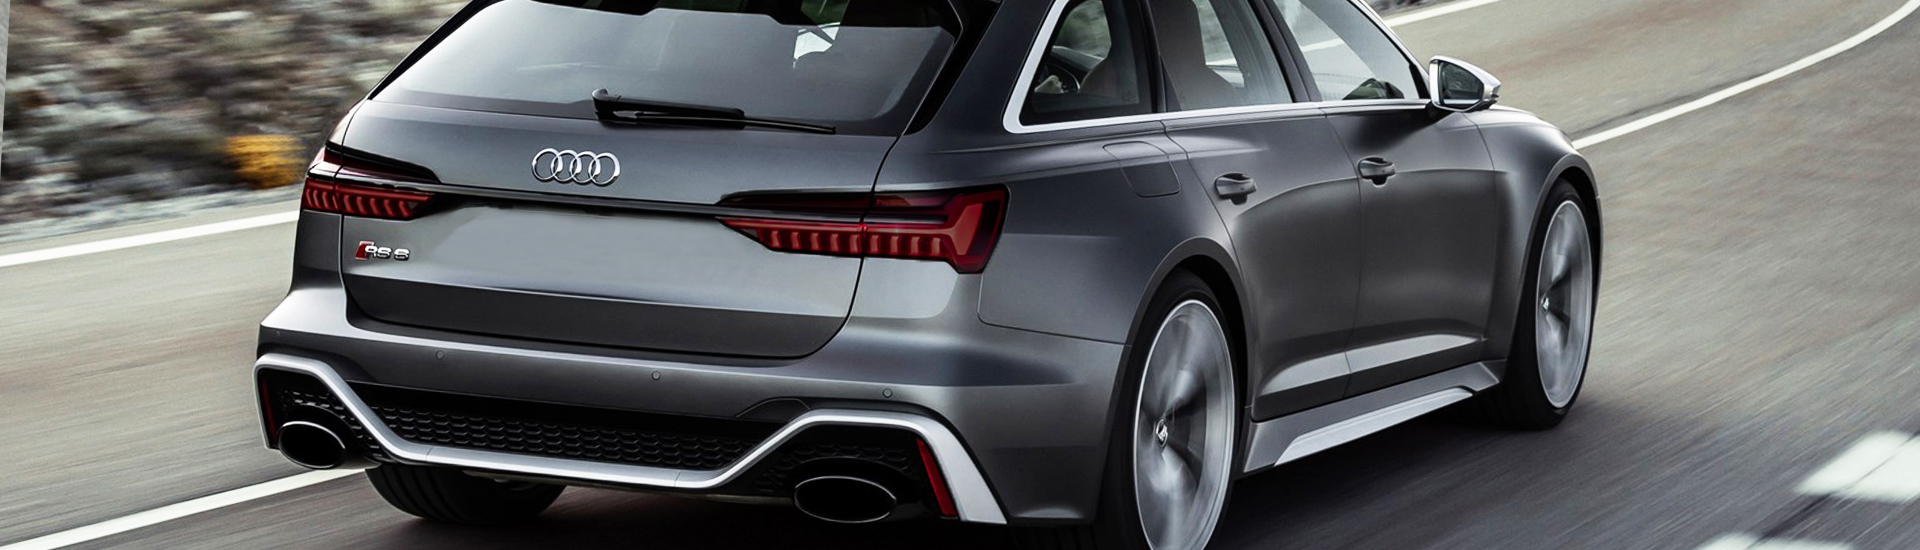 Audi RS 6 Tail Light Tint Covers